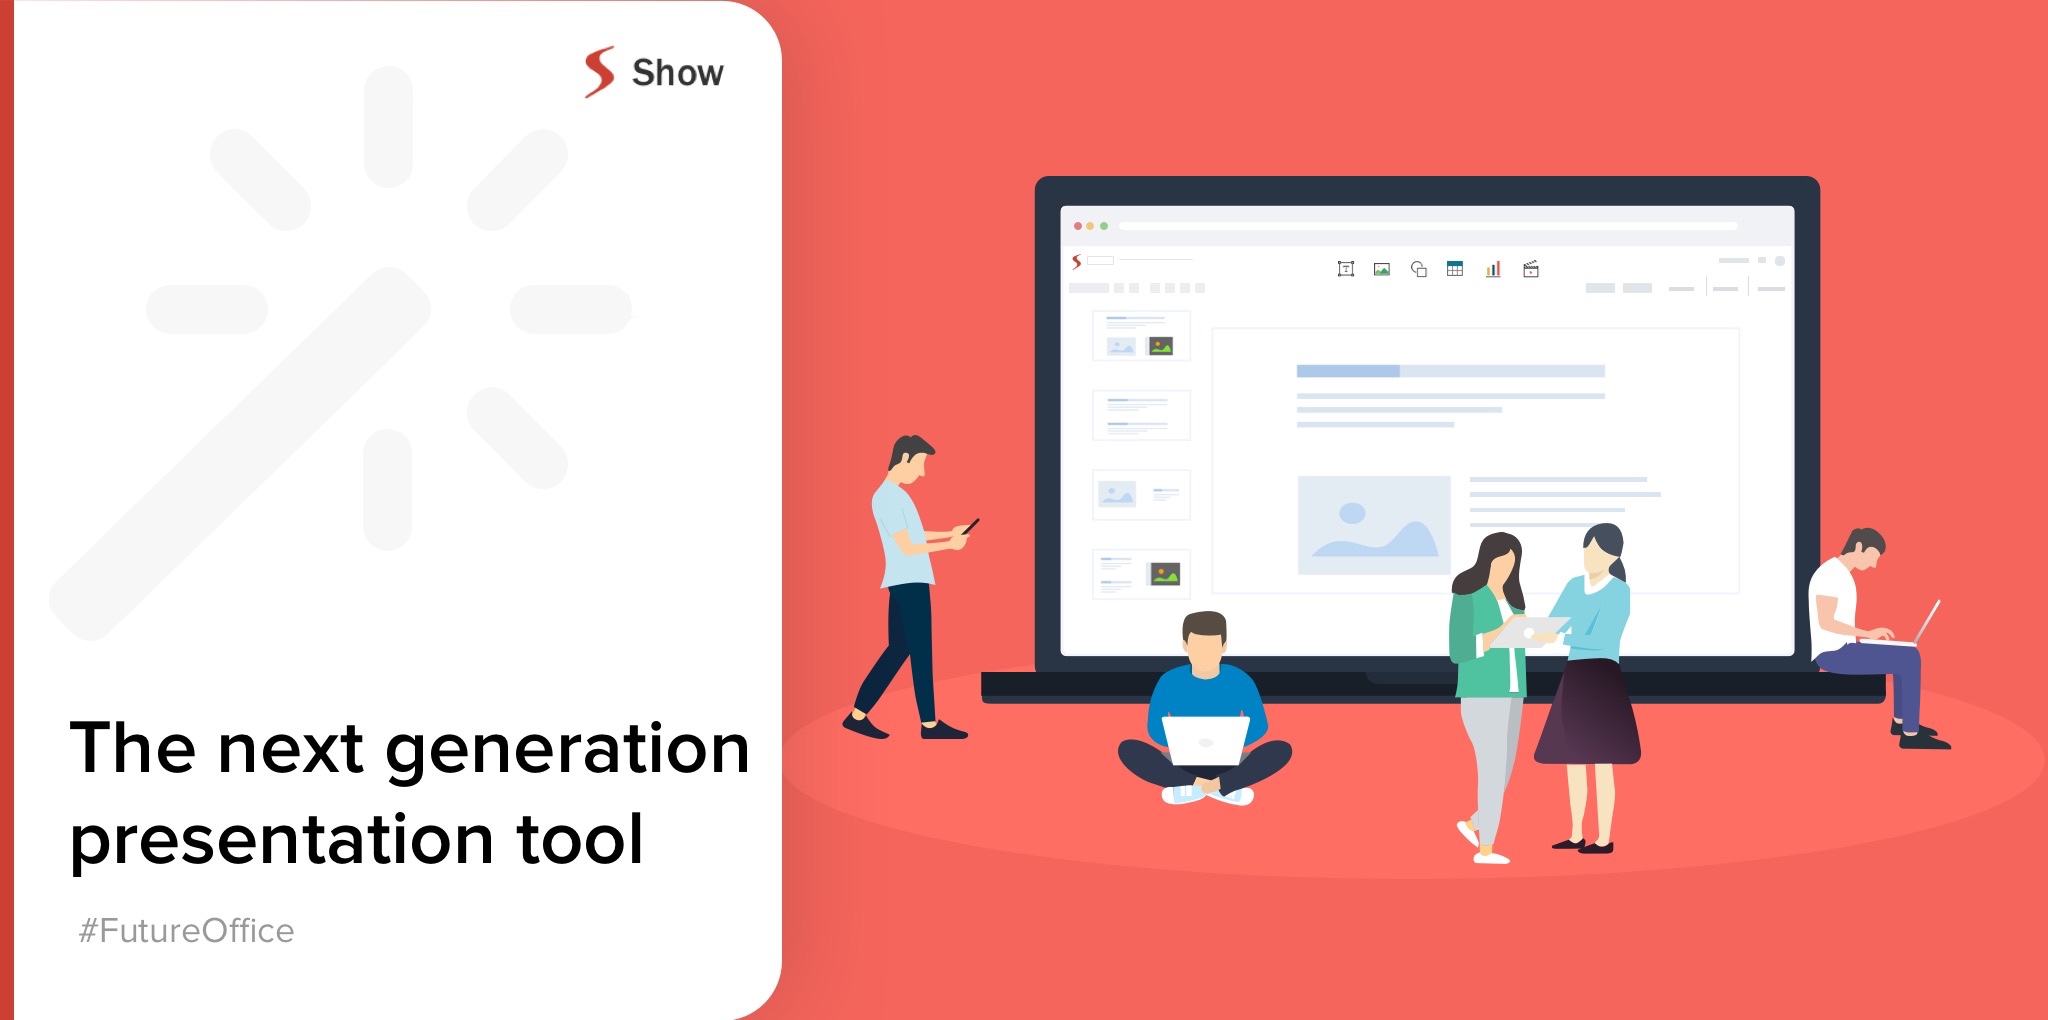 A robust presentation tool for the modern office - Zoho Show